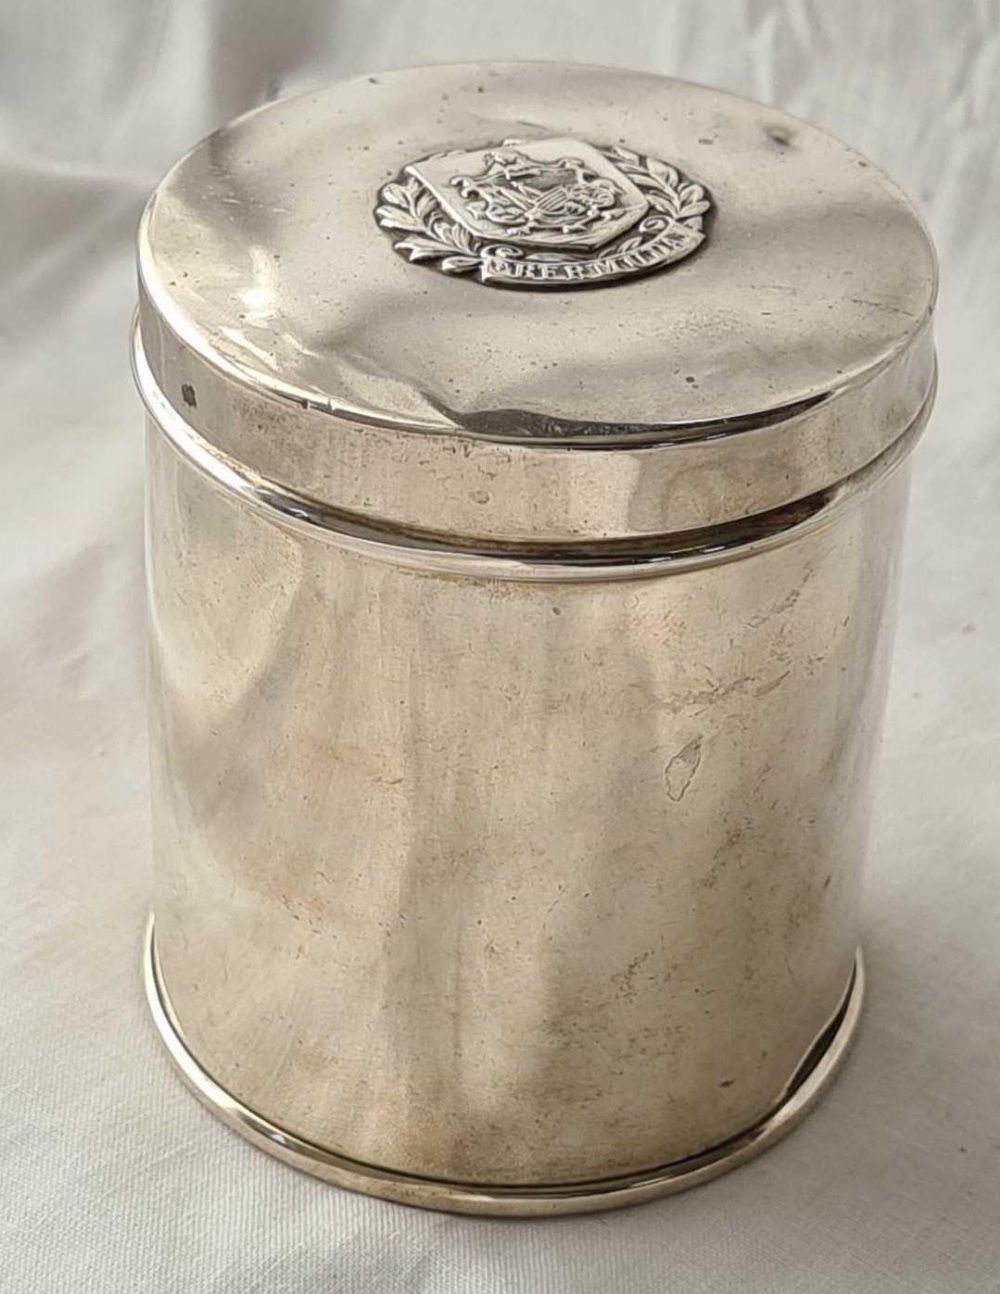 A cylindrical jar and cover with applied crest - 3.5 high - Birmingham 1948 - 124 g.